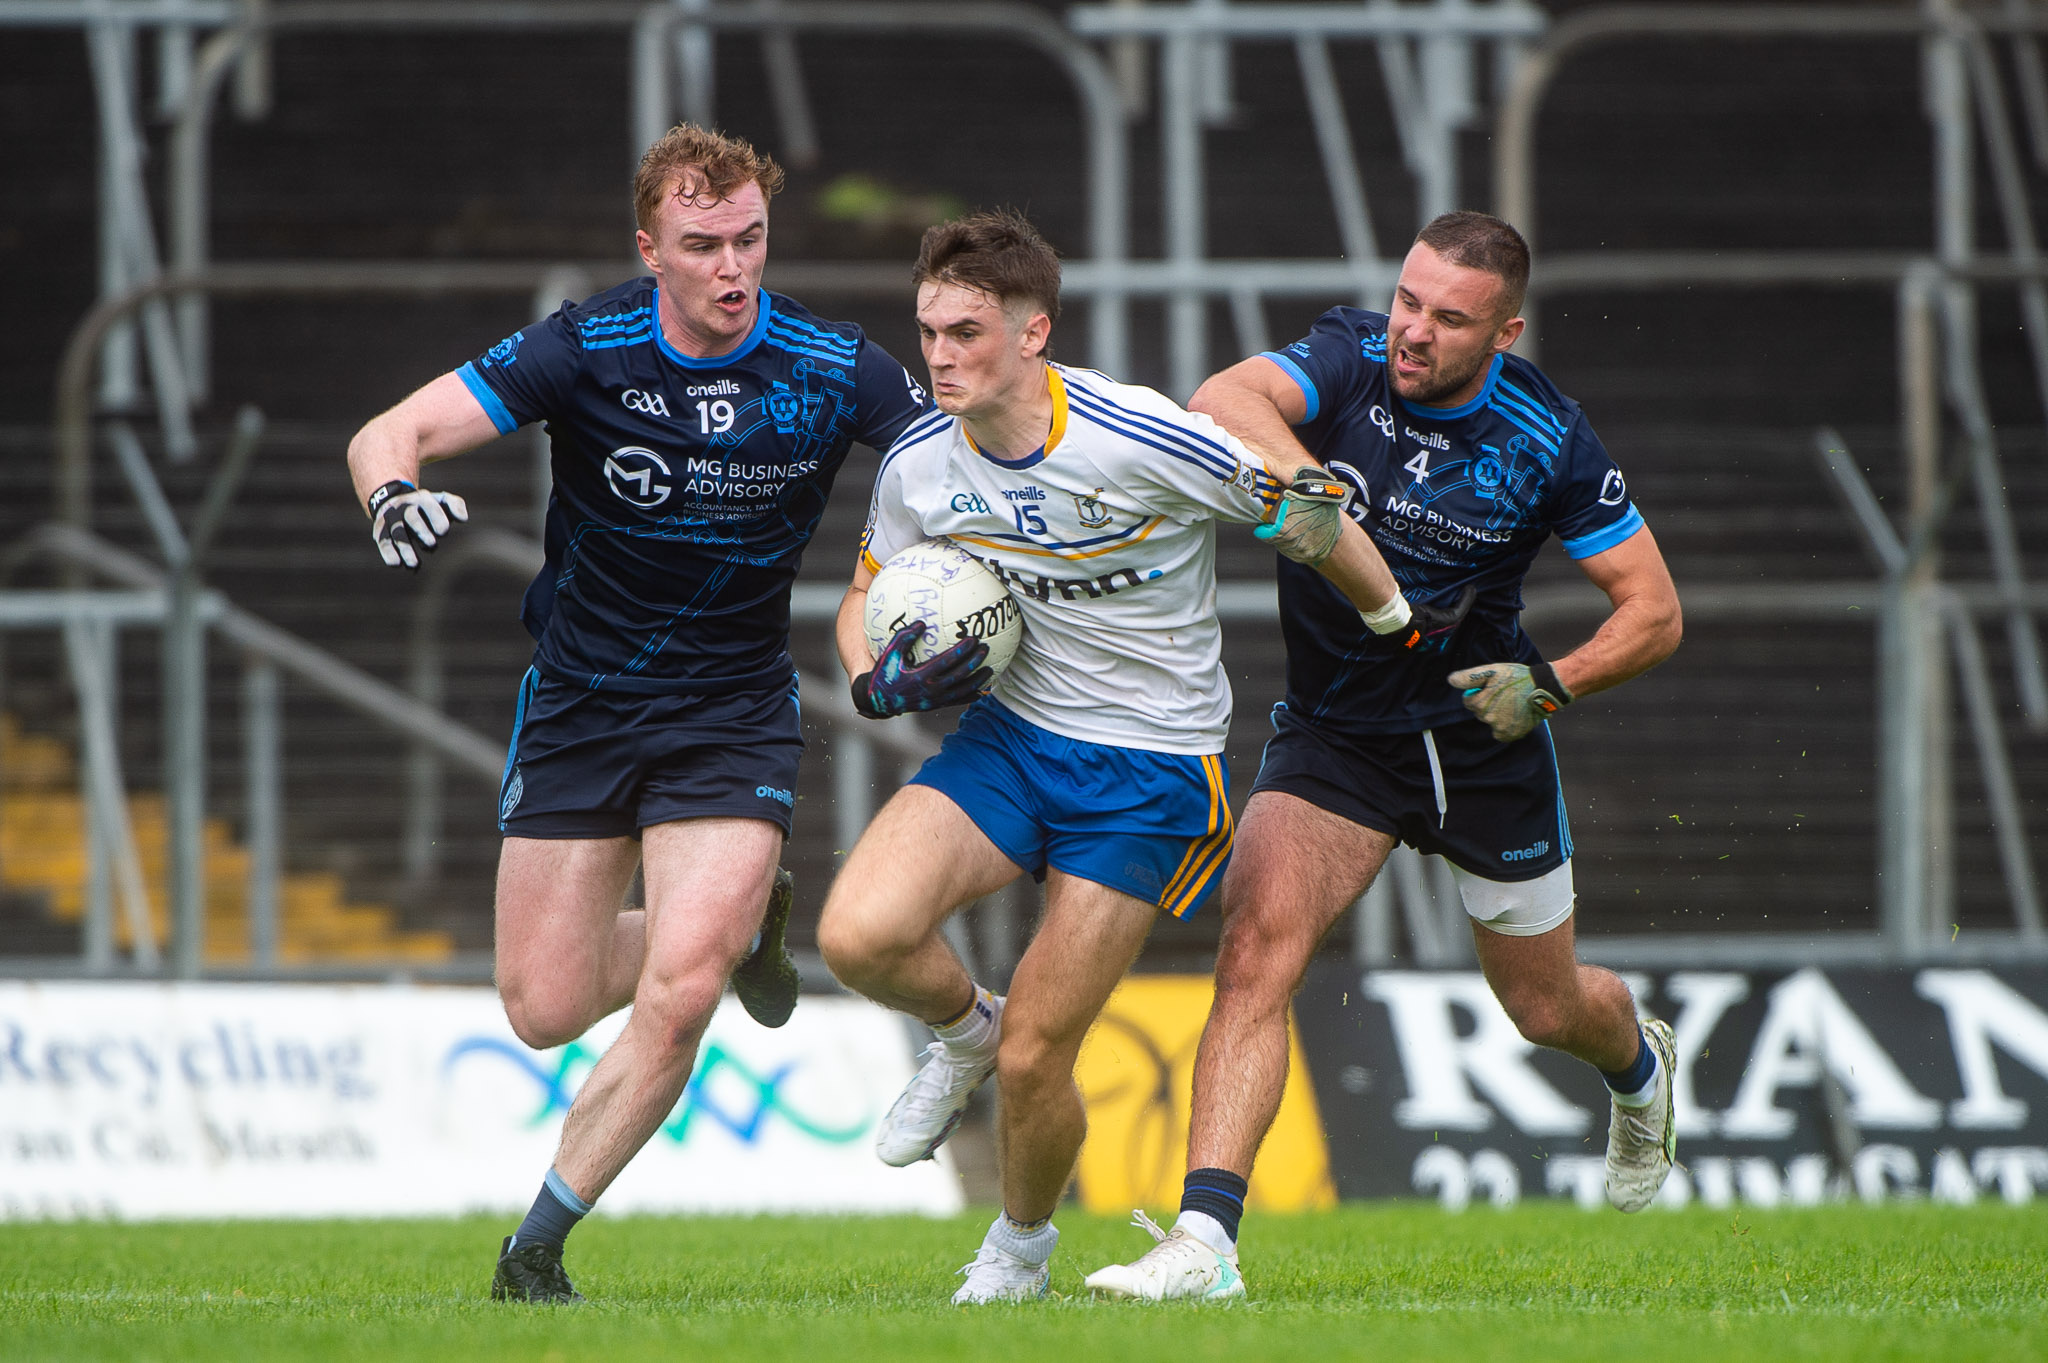 ‘Cilles down Ratoath to secure top spot